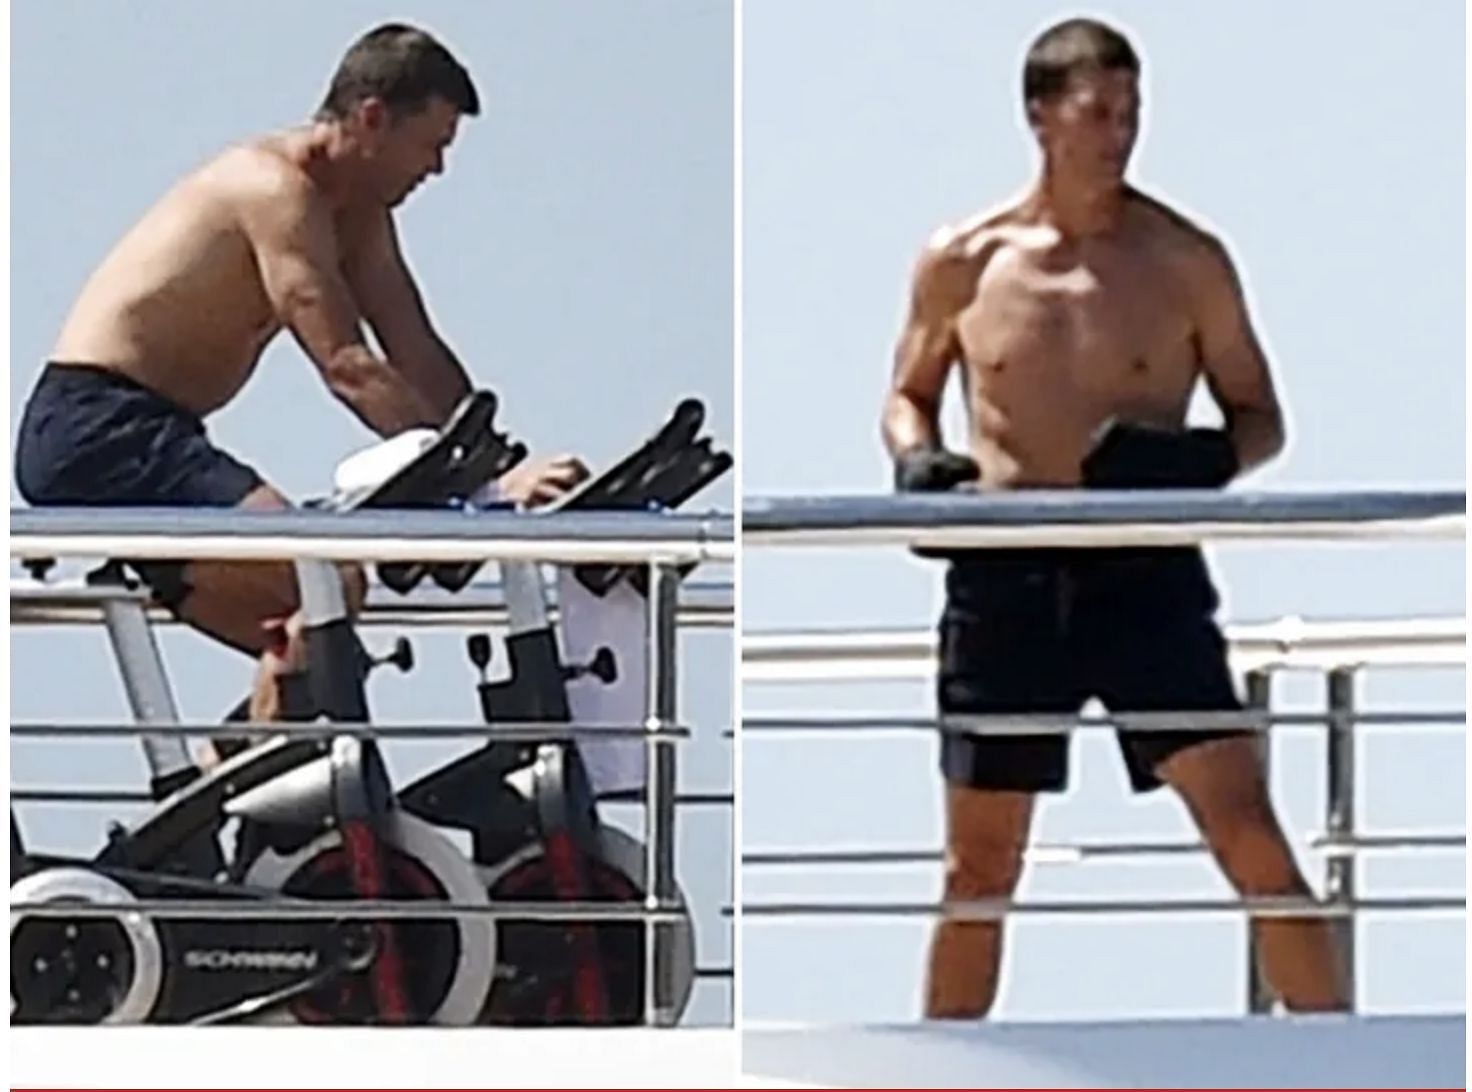 Tom Brady shirtless on vacation in Italy. Source: TMZ